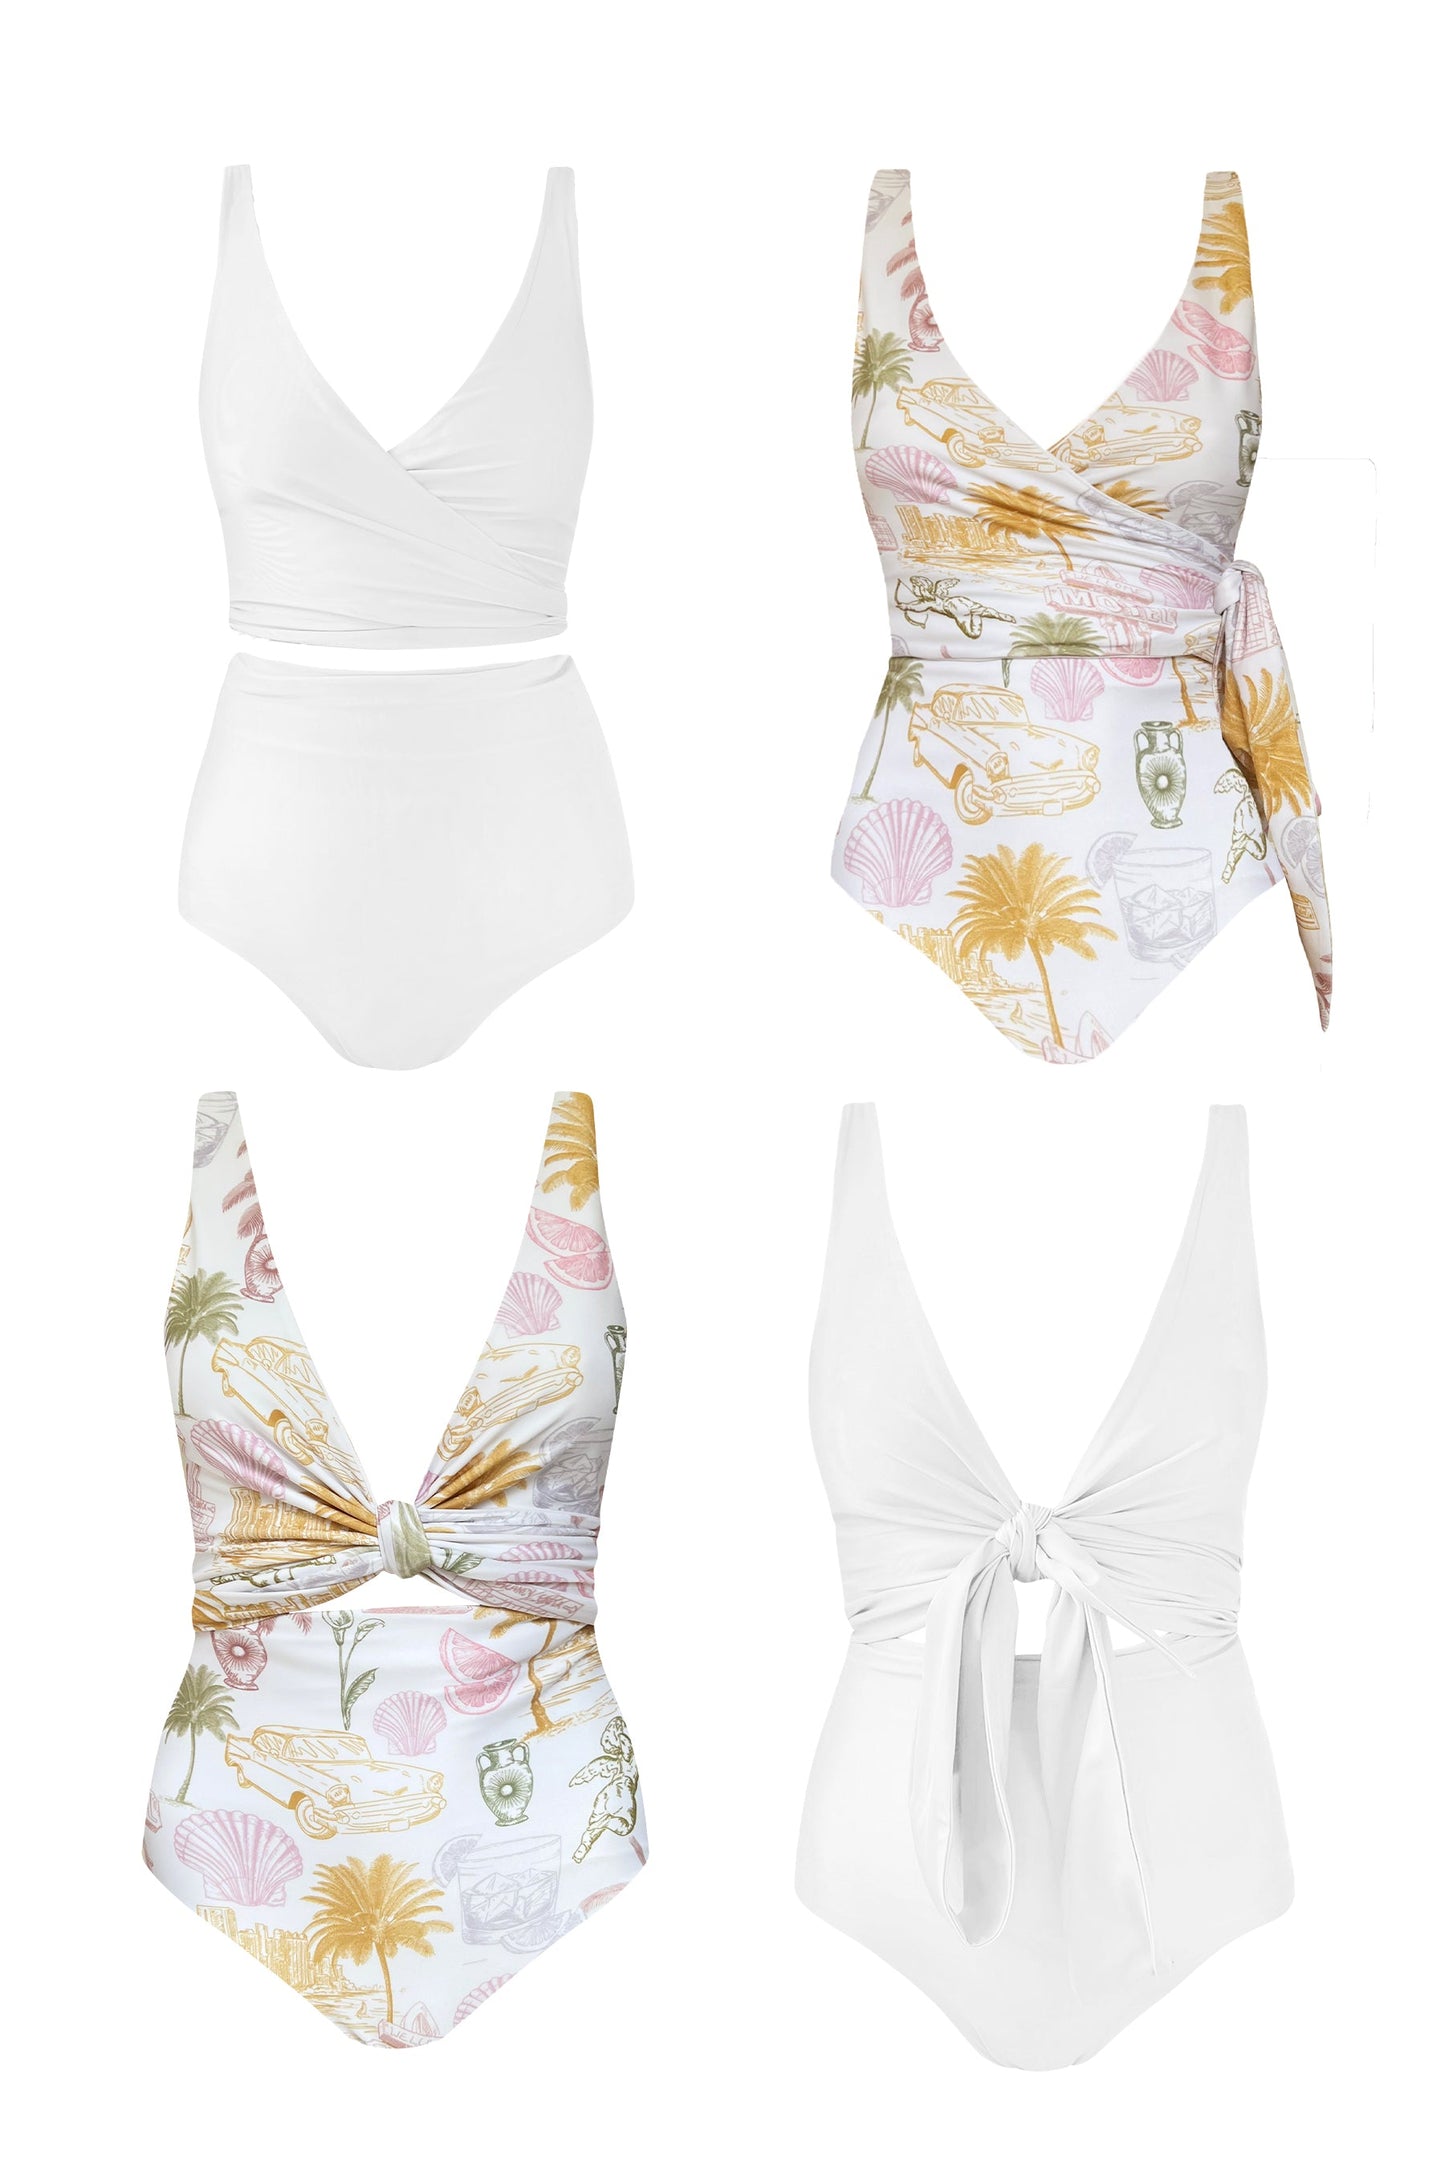 Product images of four different looks that can be made with just one Havana reversible bikini 